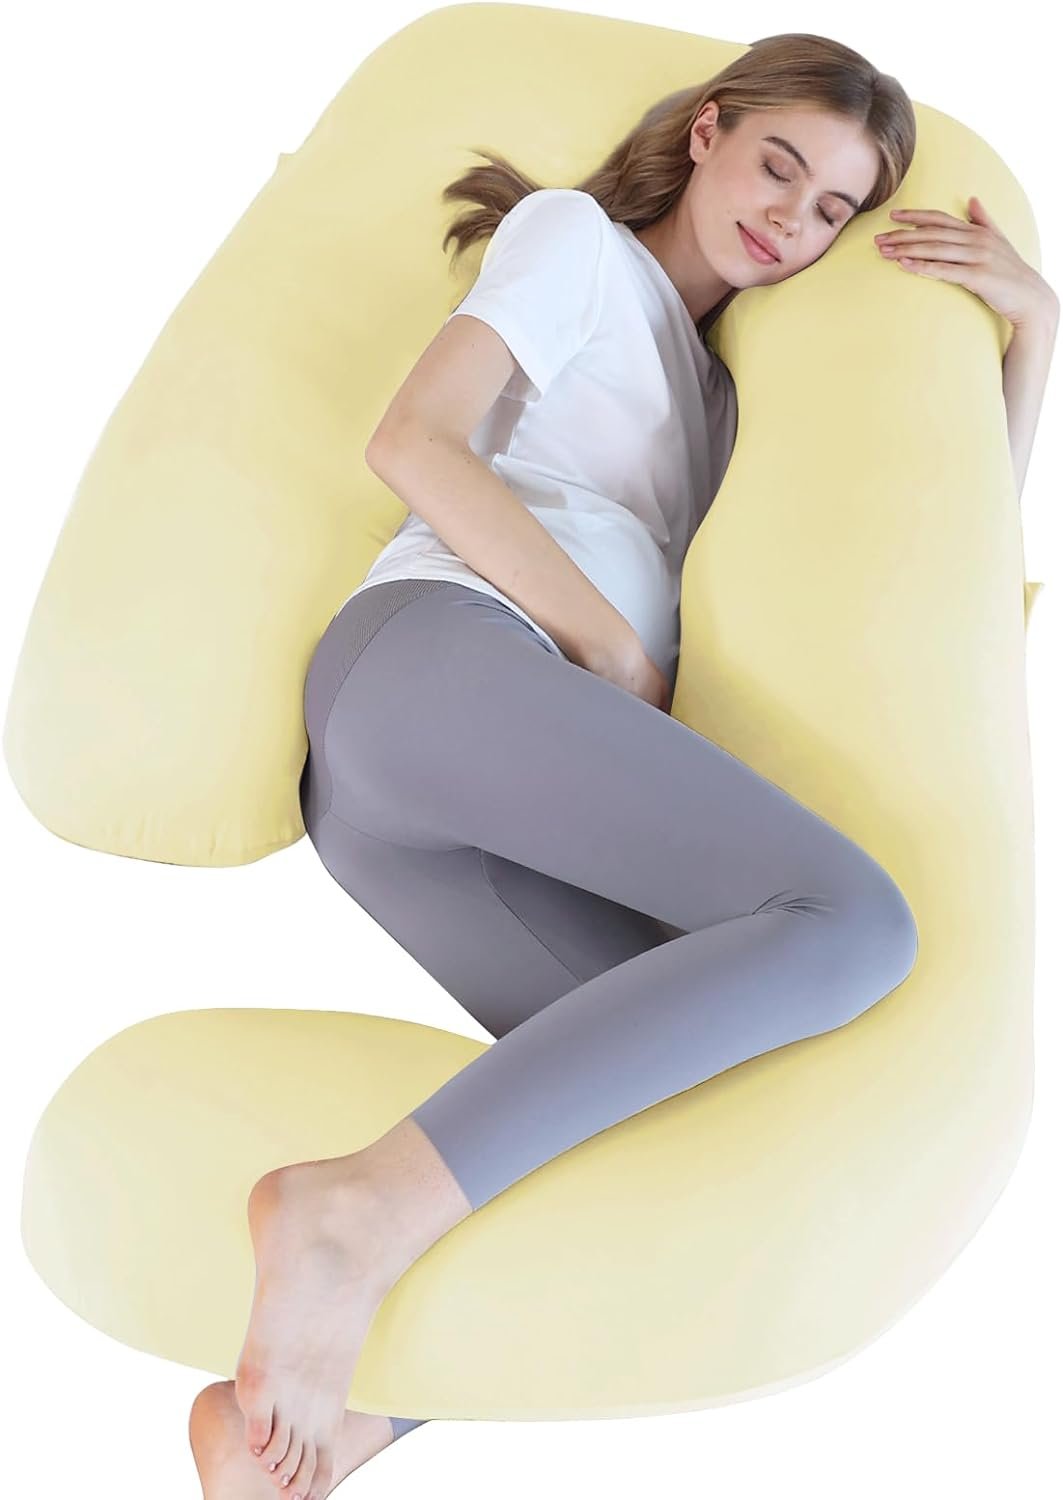 Sasttie Pregnancy Pillows for Sleeping, Maternity Pillow for Pregnant Women, U Shaped Body Pillow Pregnancy Must Haves, 59 Full Pregnant Pillow with Removable Cover, Light Yellow